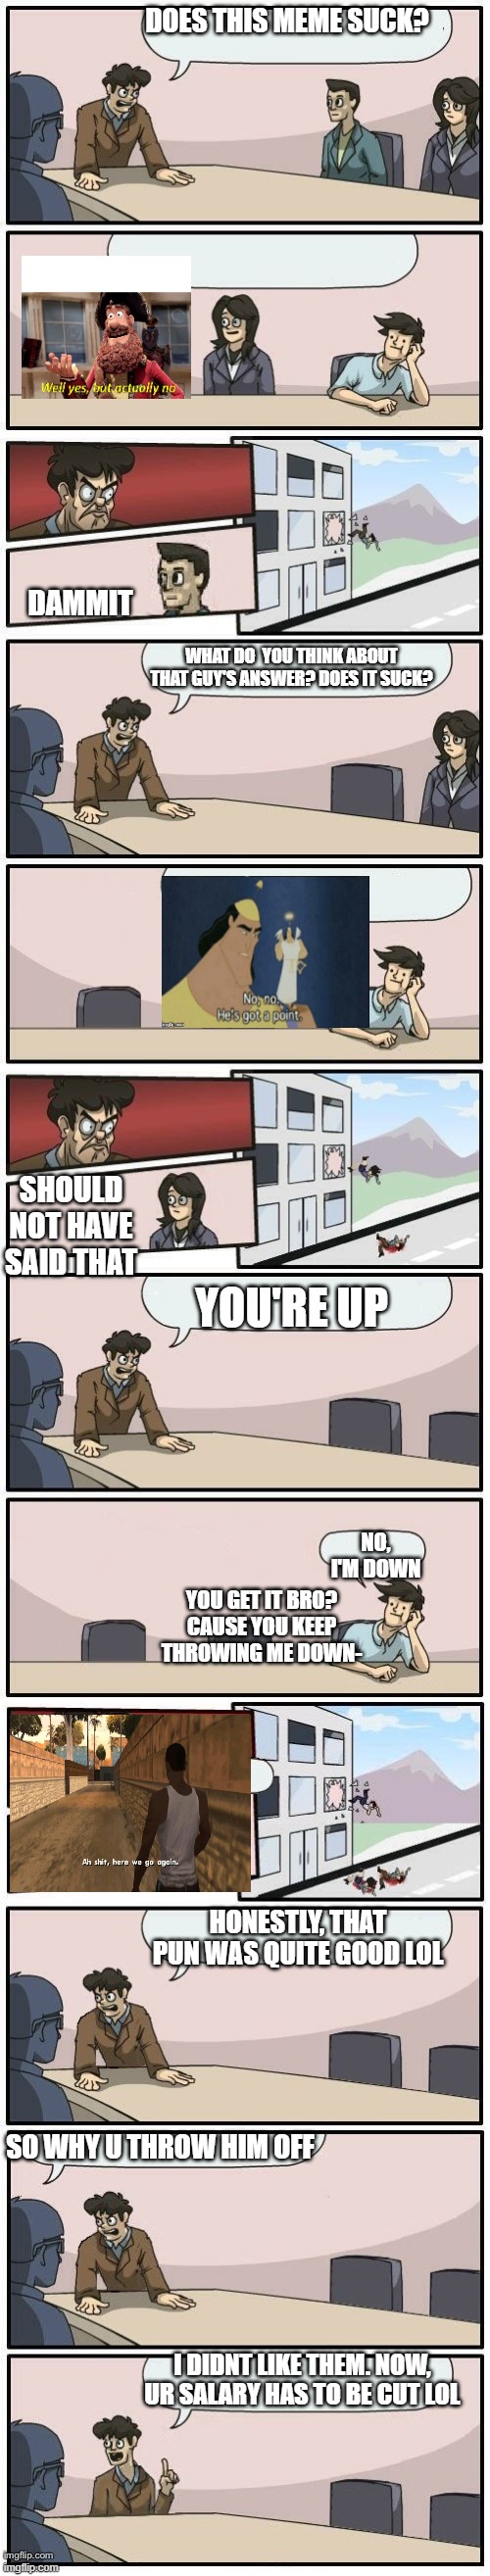 Boardroom Meeting Suggestions Extended | DOES THIS MEME SUCK? DAMMIT; WHAT DO  YOU THINK ABOUT THAT GUY'S ANSWER? DOES IT SUCK? SHOULD NOT HAVE SAID THAT; YOU'RE UP; NO, I'M DOWN; YOU GET IT BRO? CAUSE YOU KEEP THROWING ME DOWN-; HONESTLY, THAT PUN WAS QUITE GOOD LOL; SO WHY U THROW HIM OFF; I DIDNT LIKE THEM. NOW, UR SALARY HAS TO BE CUT LOL | image tagged in boardroom meeting suggestions extended,memes,funny | made w/ Imgflip meme maker